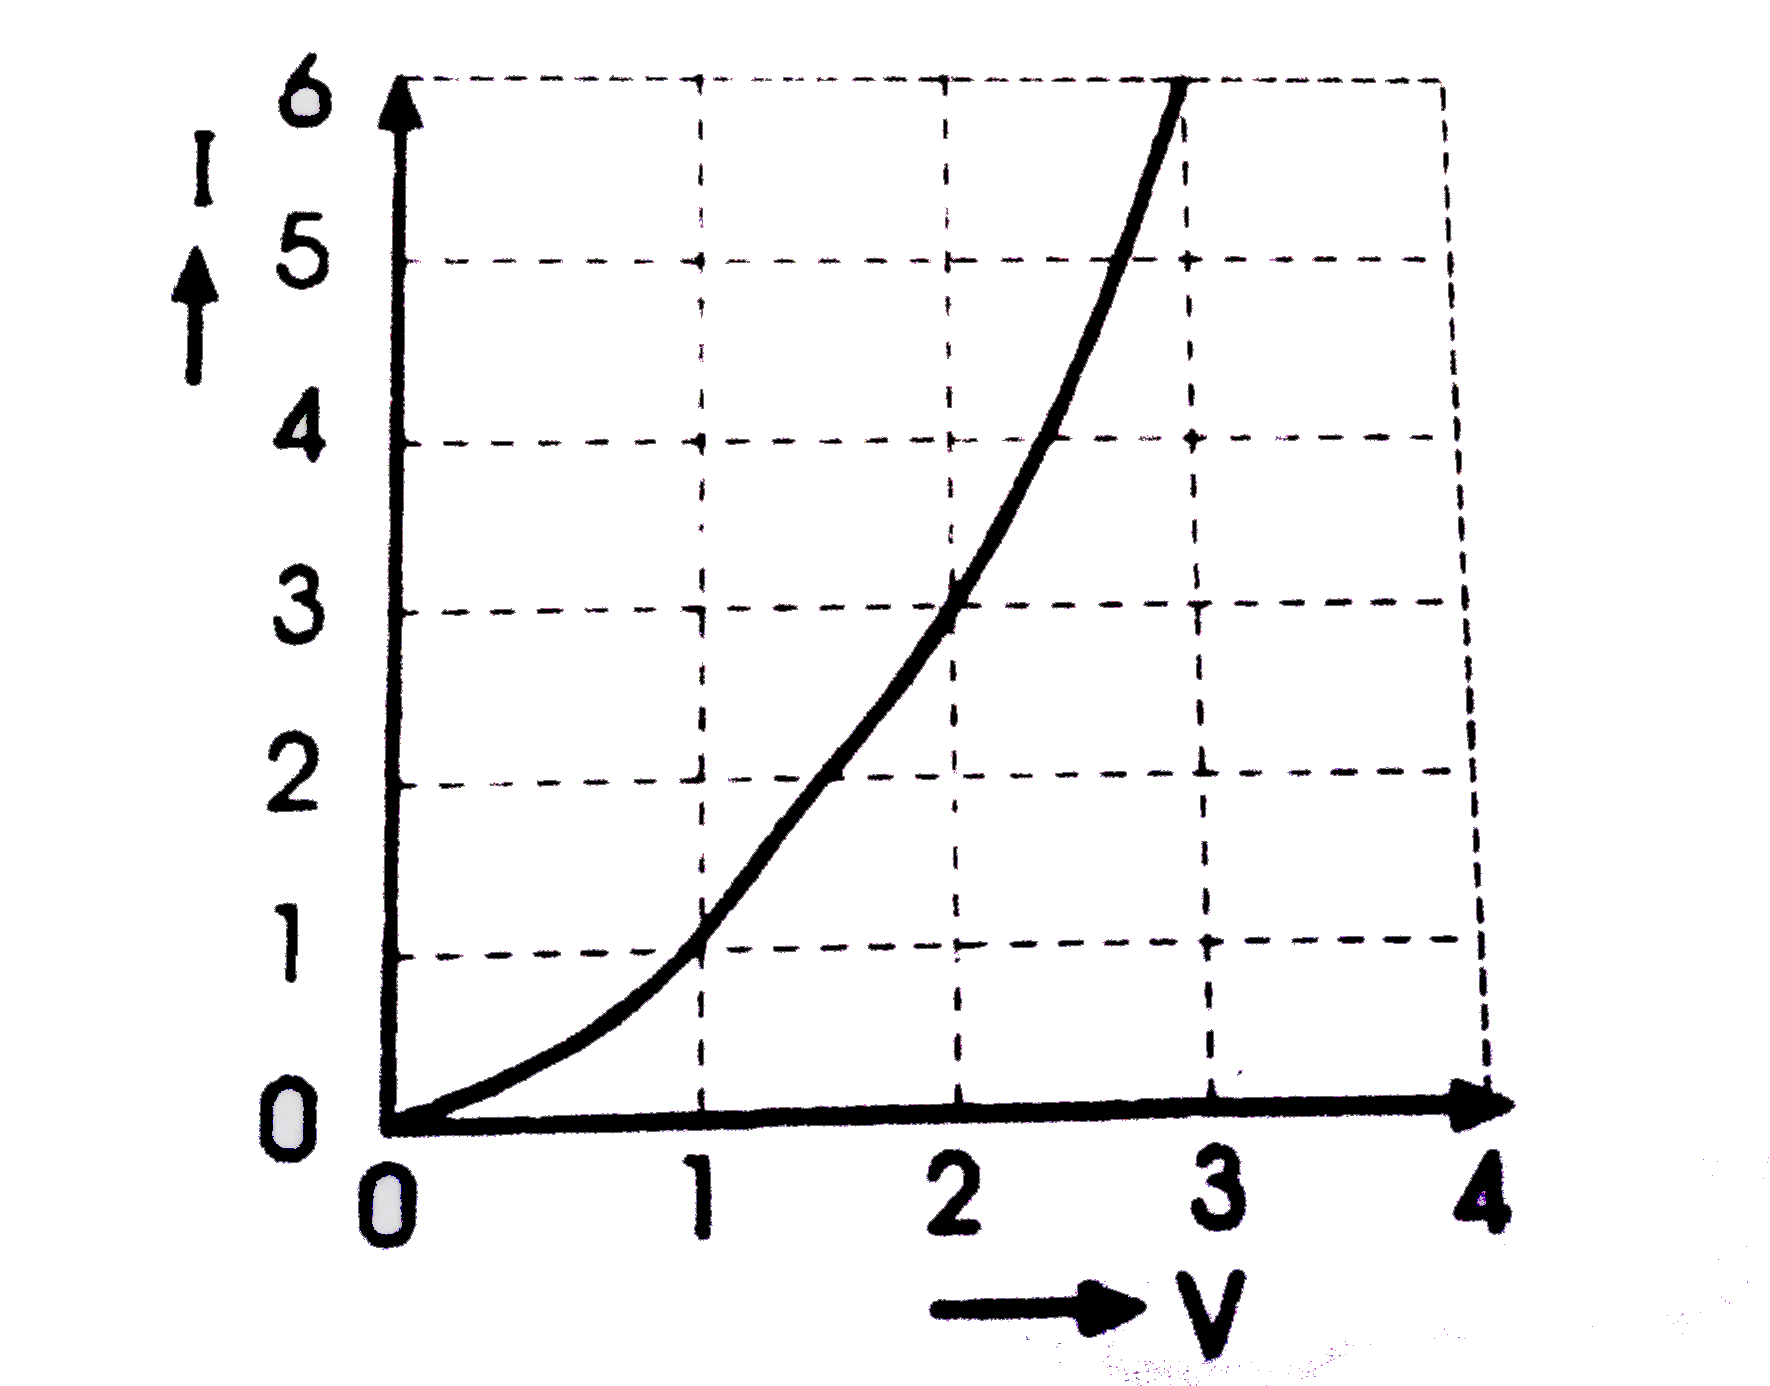 A cell emf 3V and internal resistance 0.75Omega is connected to a nonlinear conductor whose V-I g raph is shown in figure obtain graphically the current drawn from the cell and its terminal voltage.